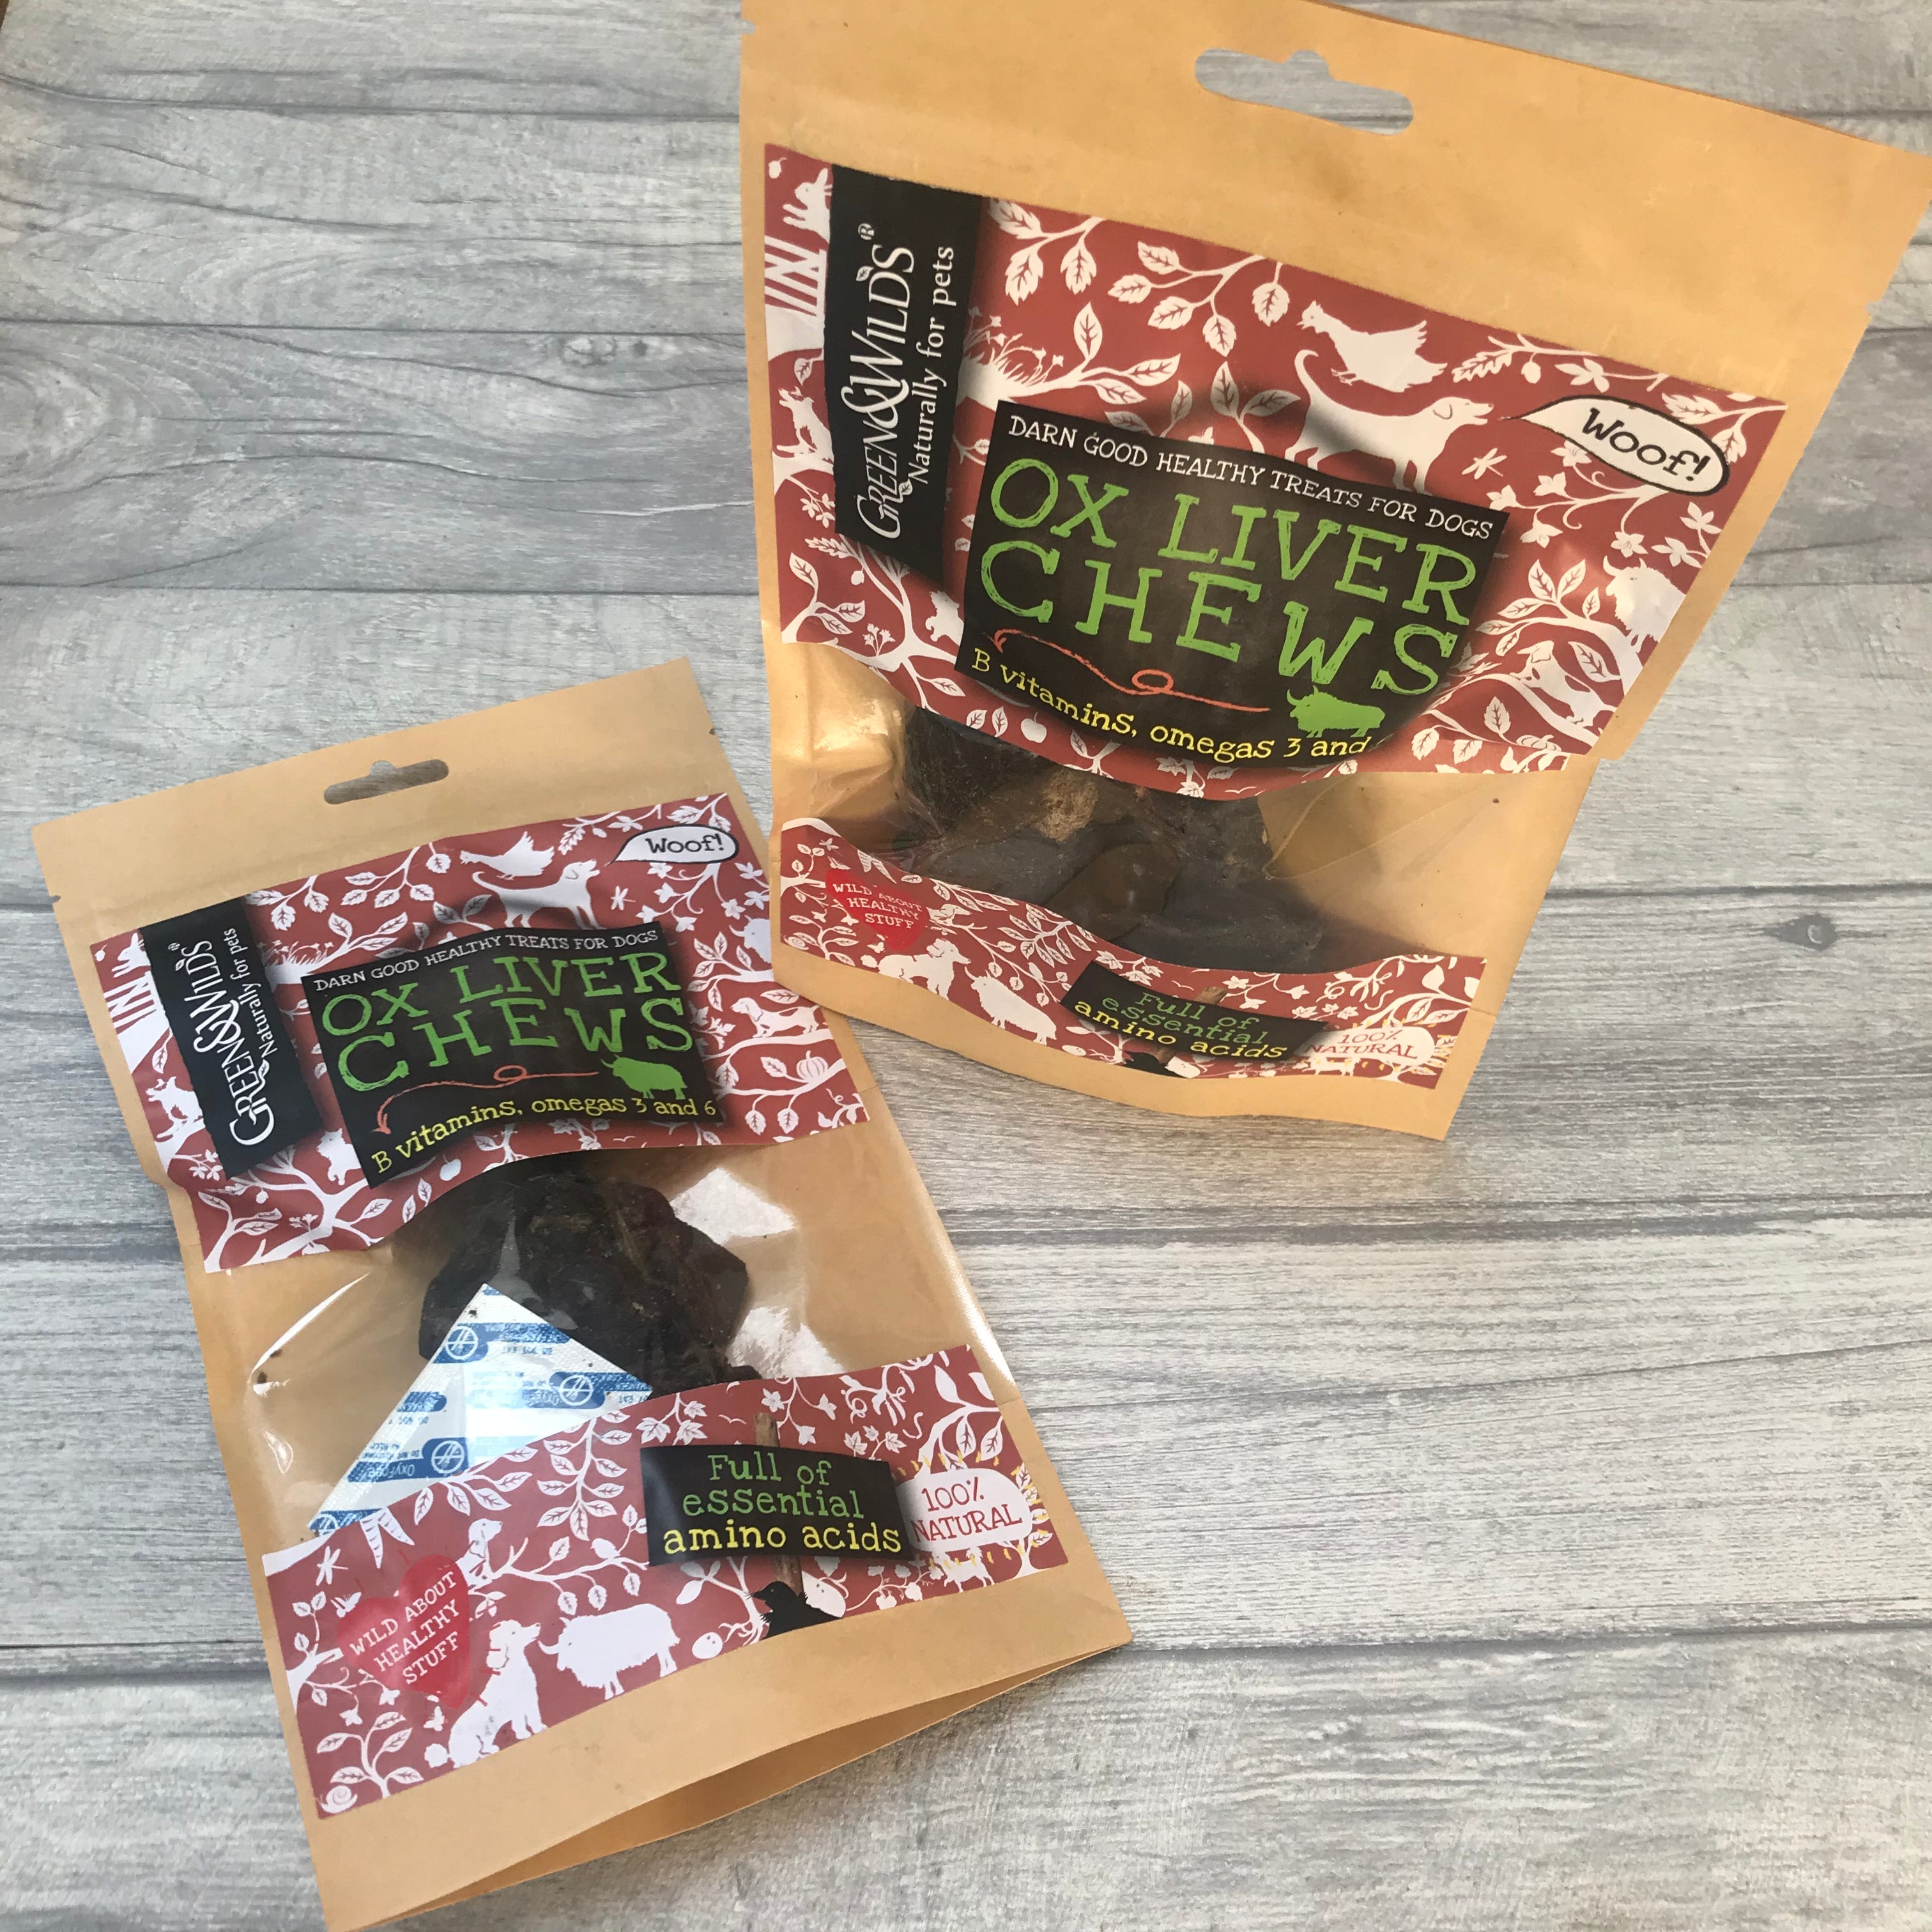 Ox Liver Chews - Green and Wilds